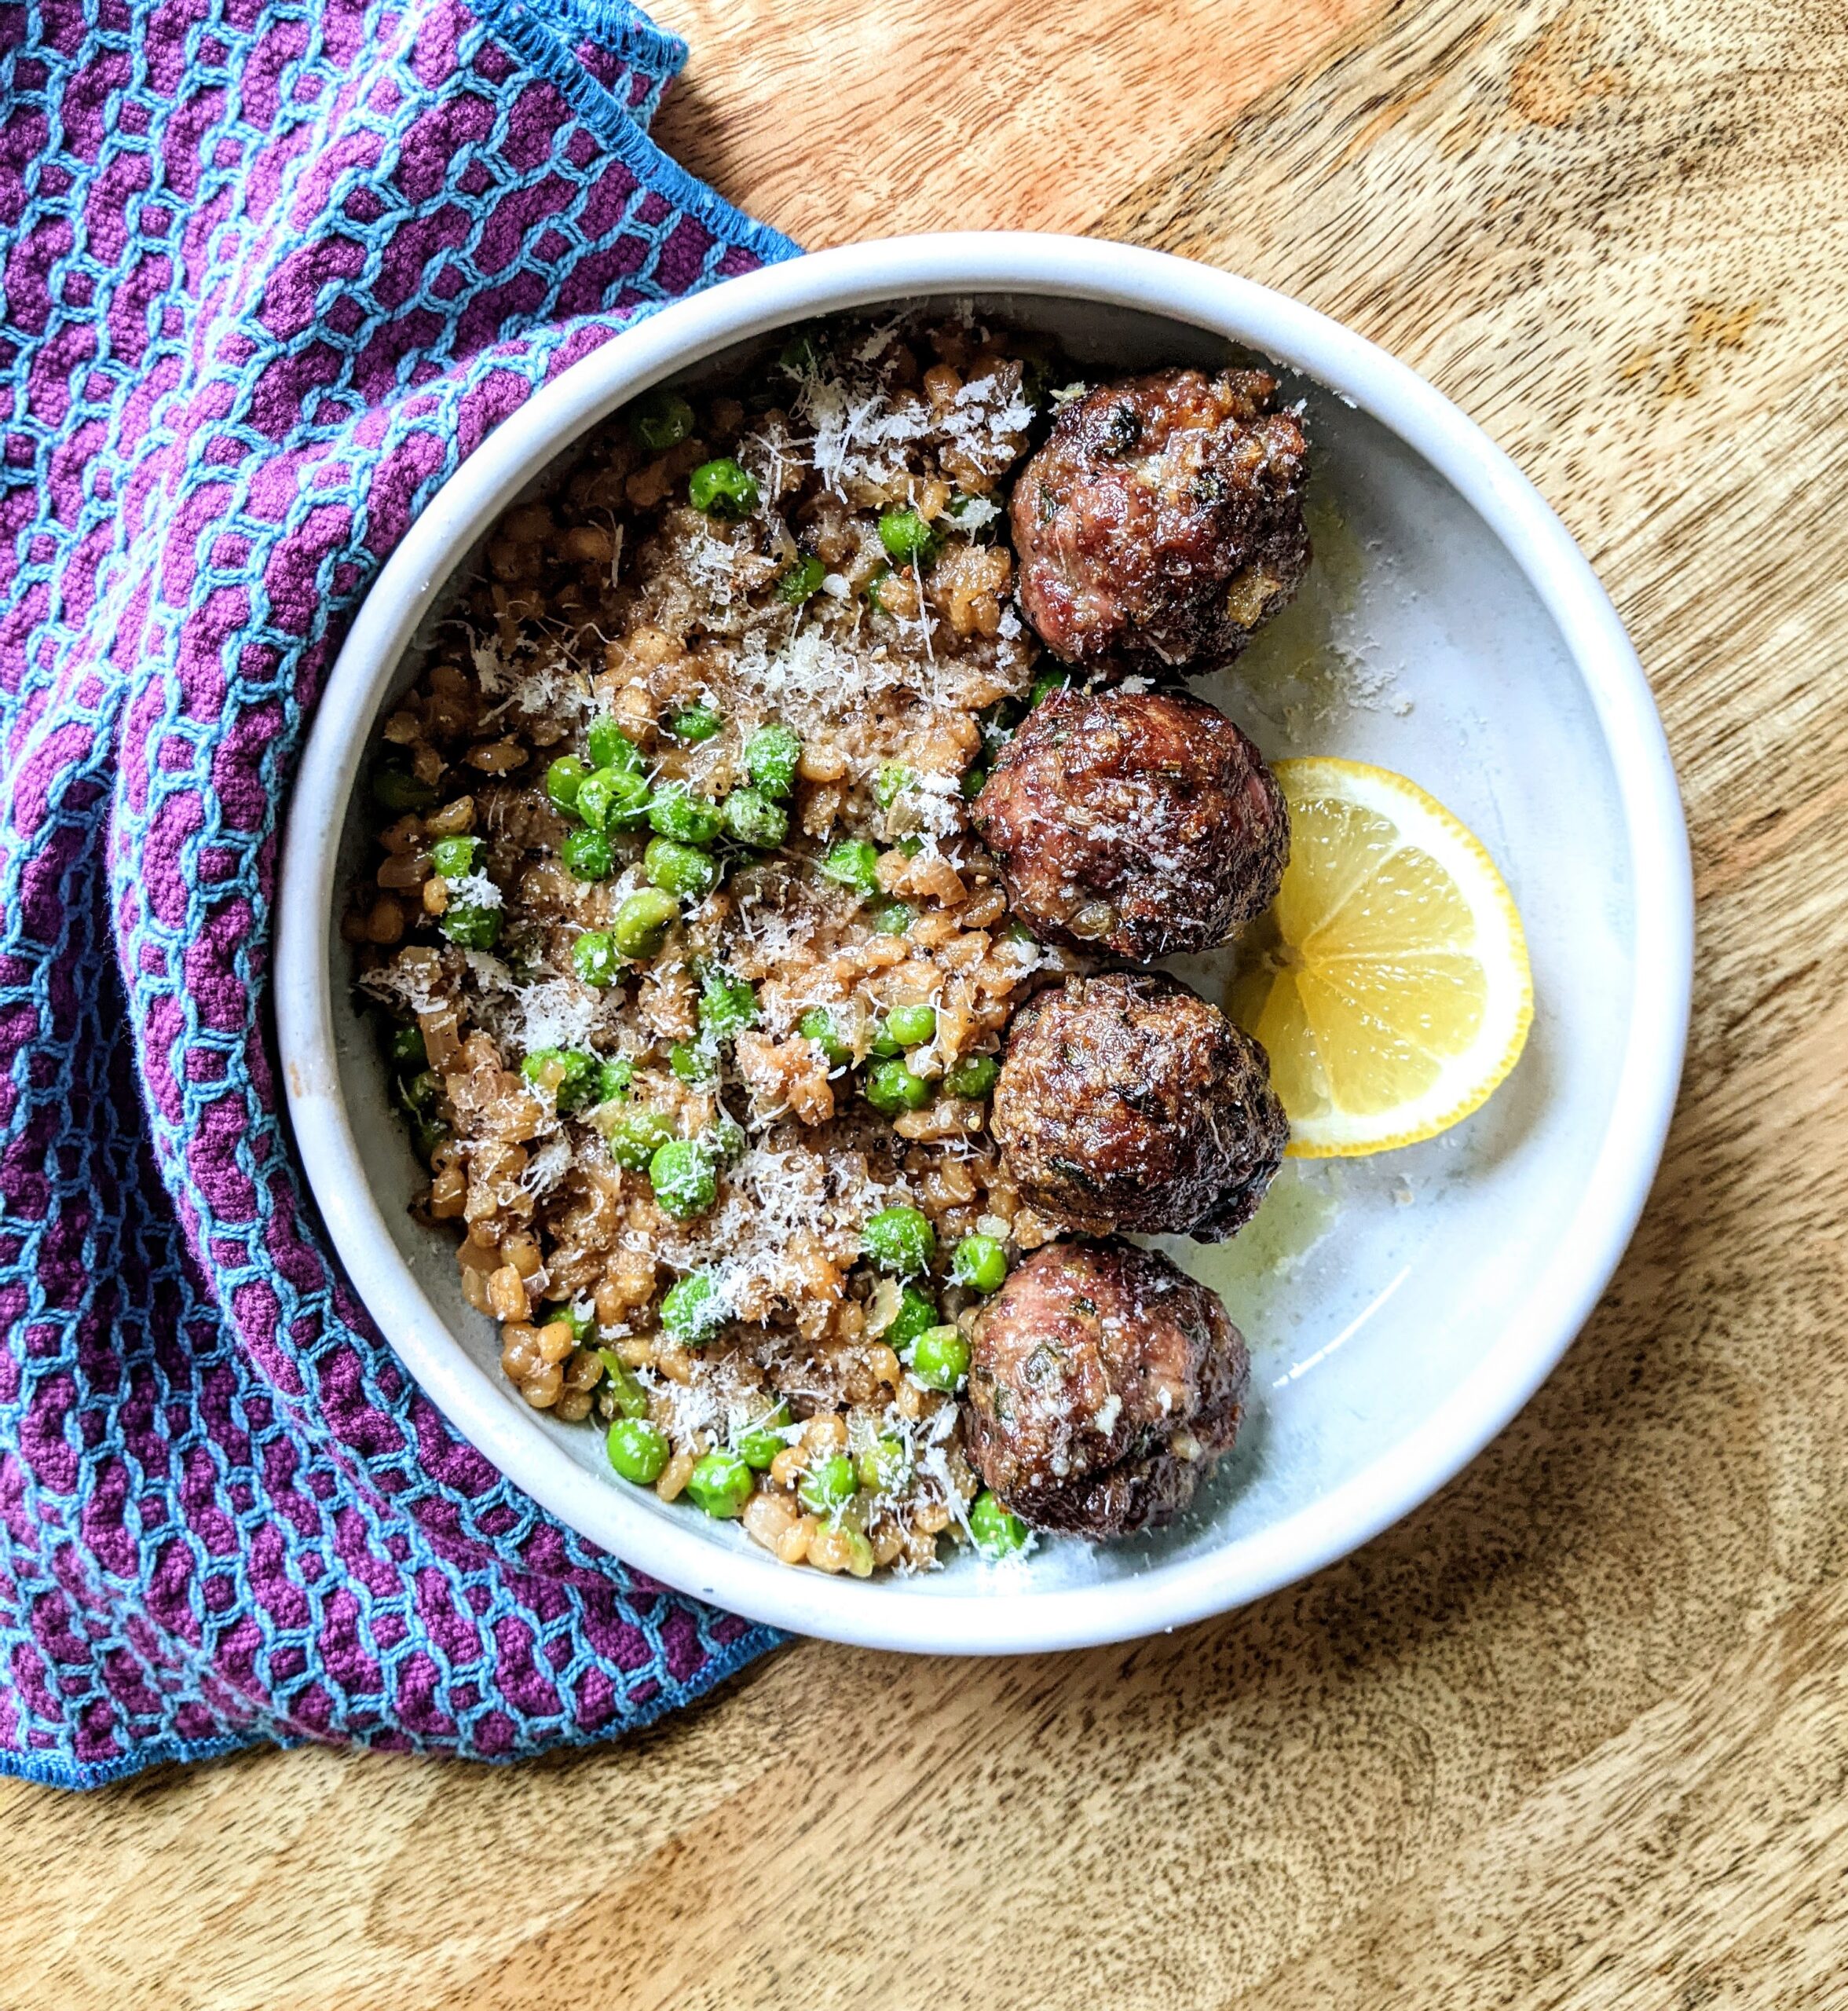 Baked Meatballs with Fresh Herbs and Barley and Pea Risotto